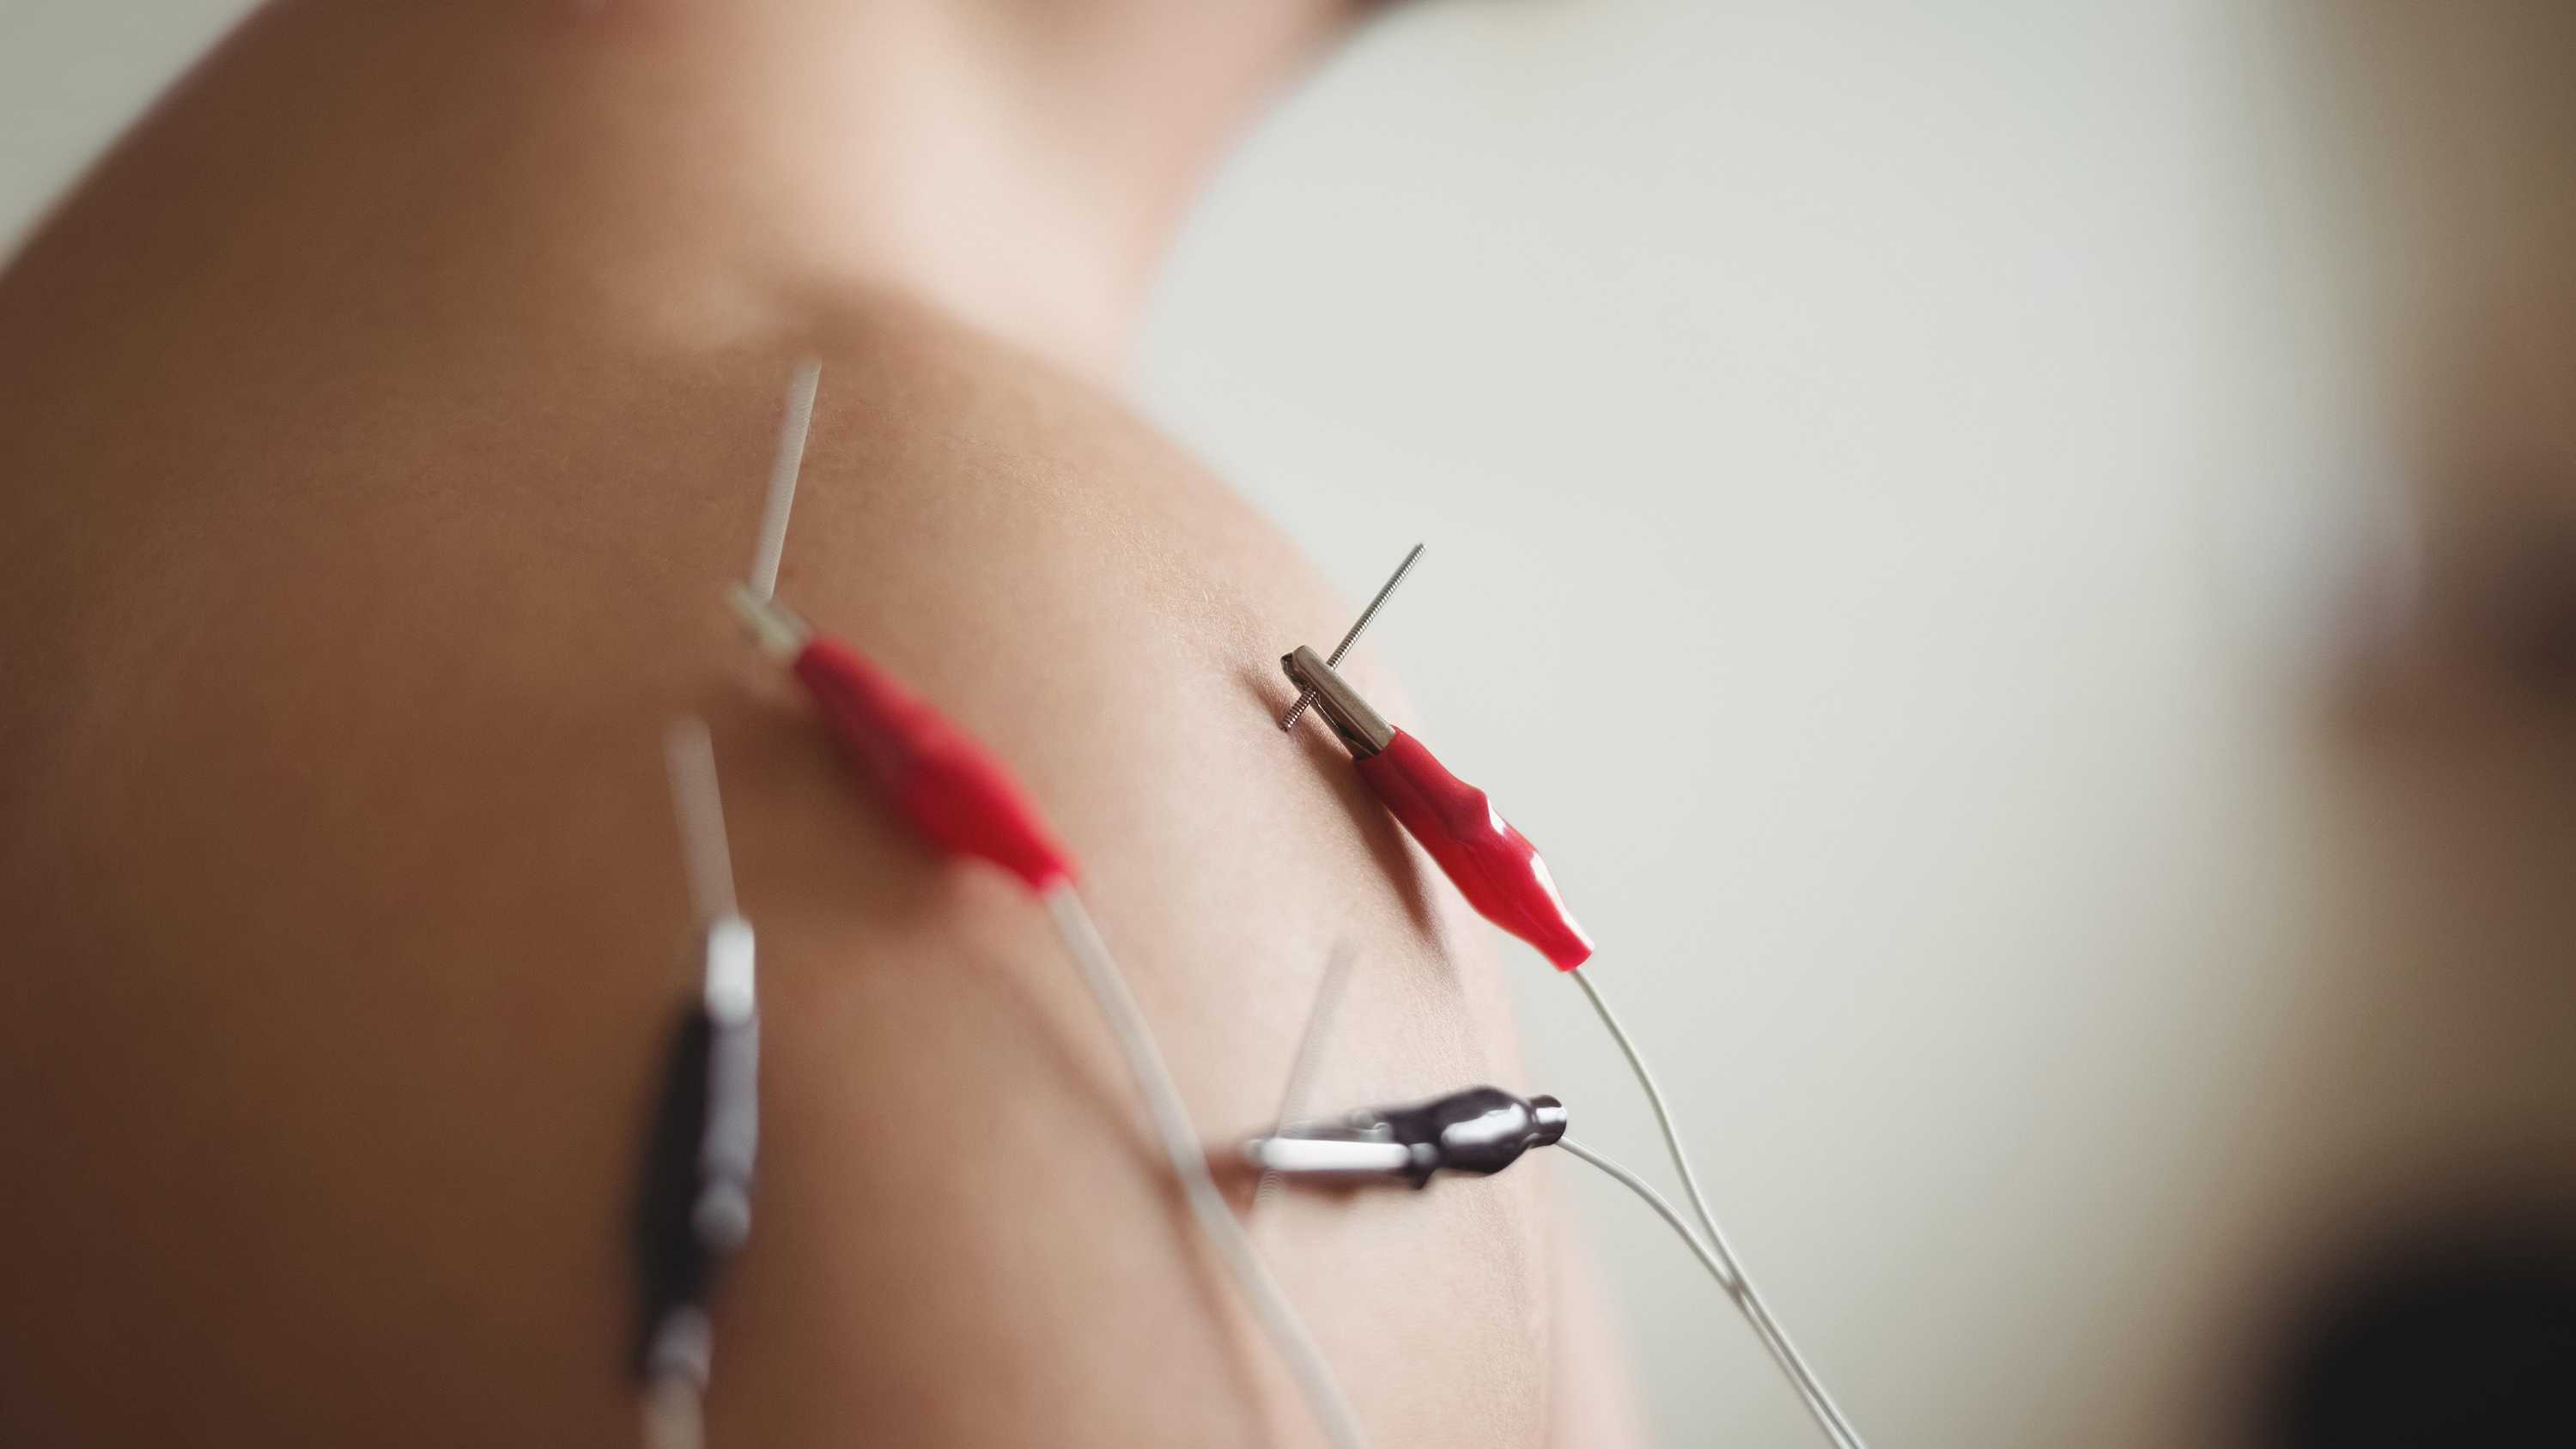 Man receiving dry needling with electrical stimulation